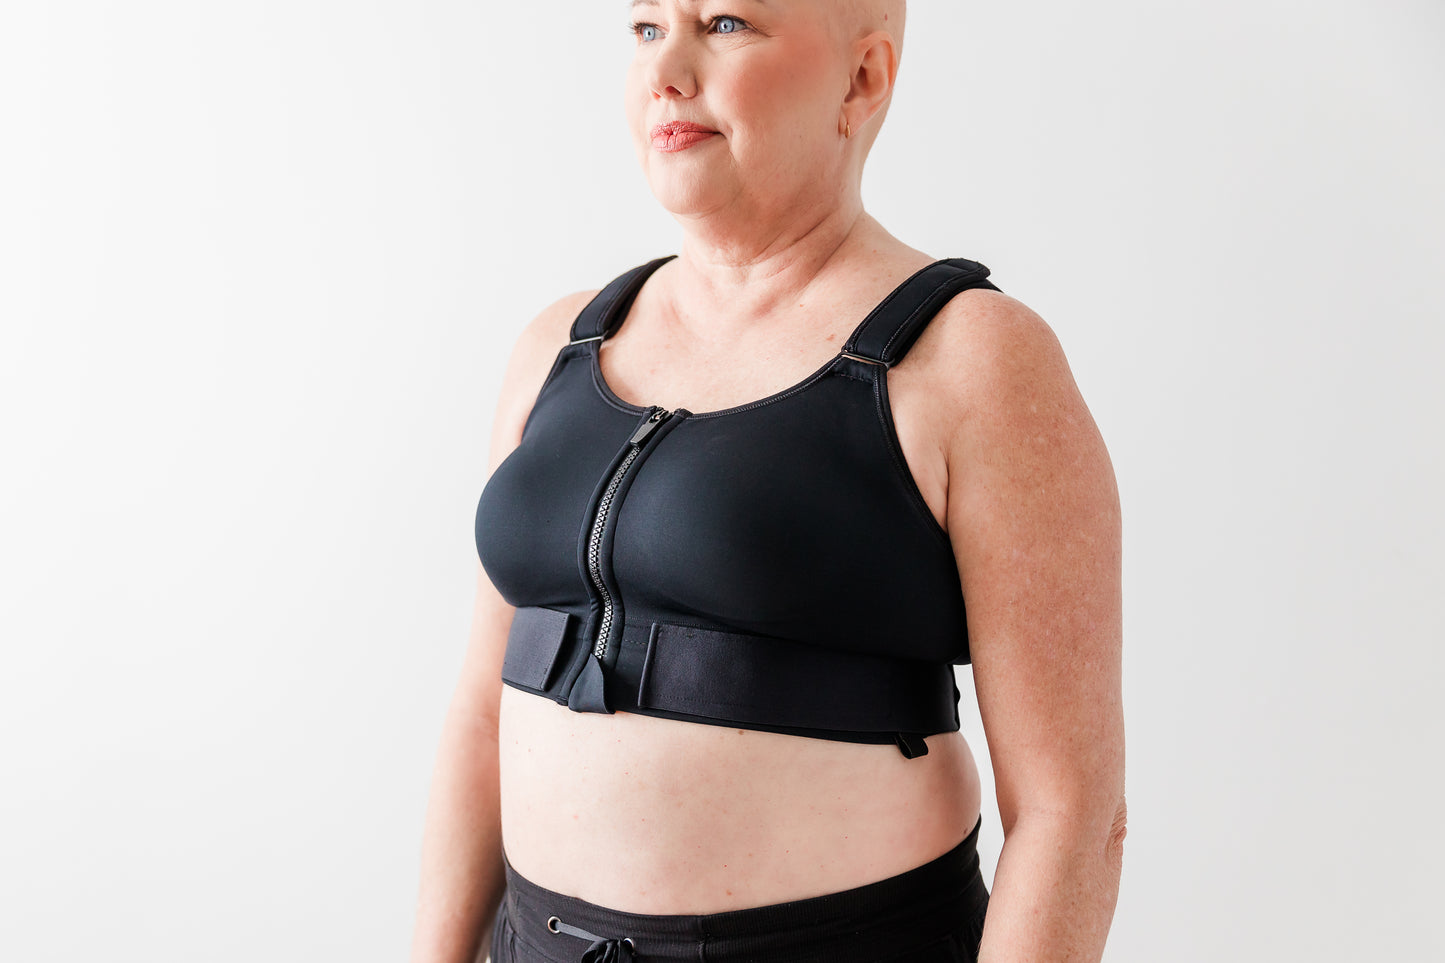 The Resilience Bra